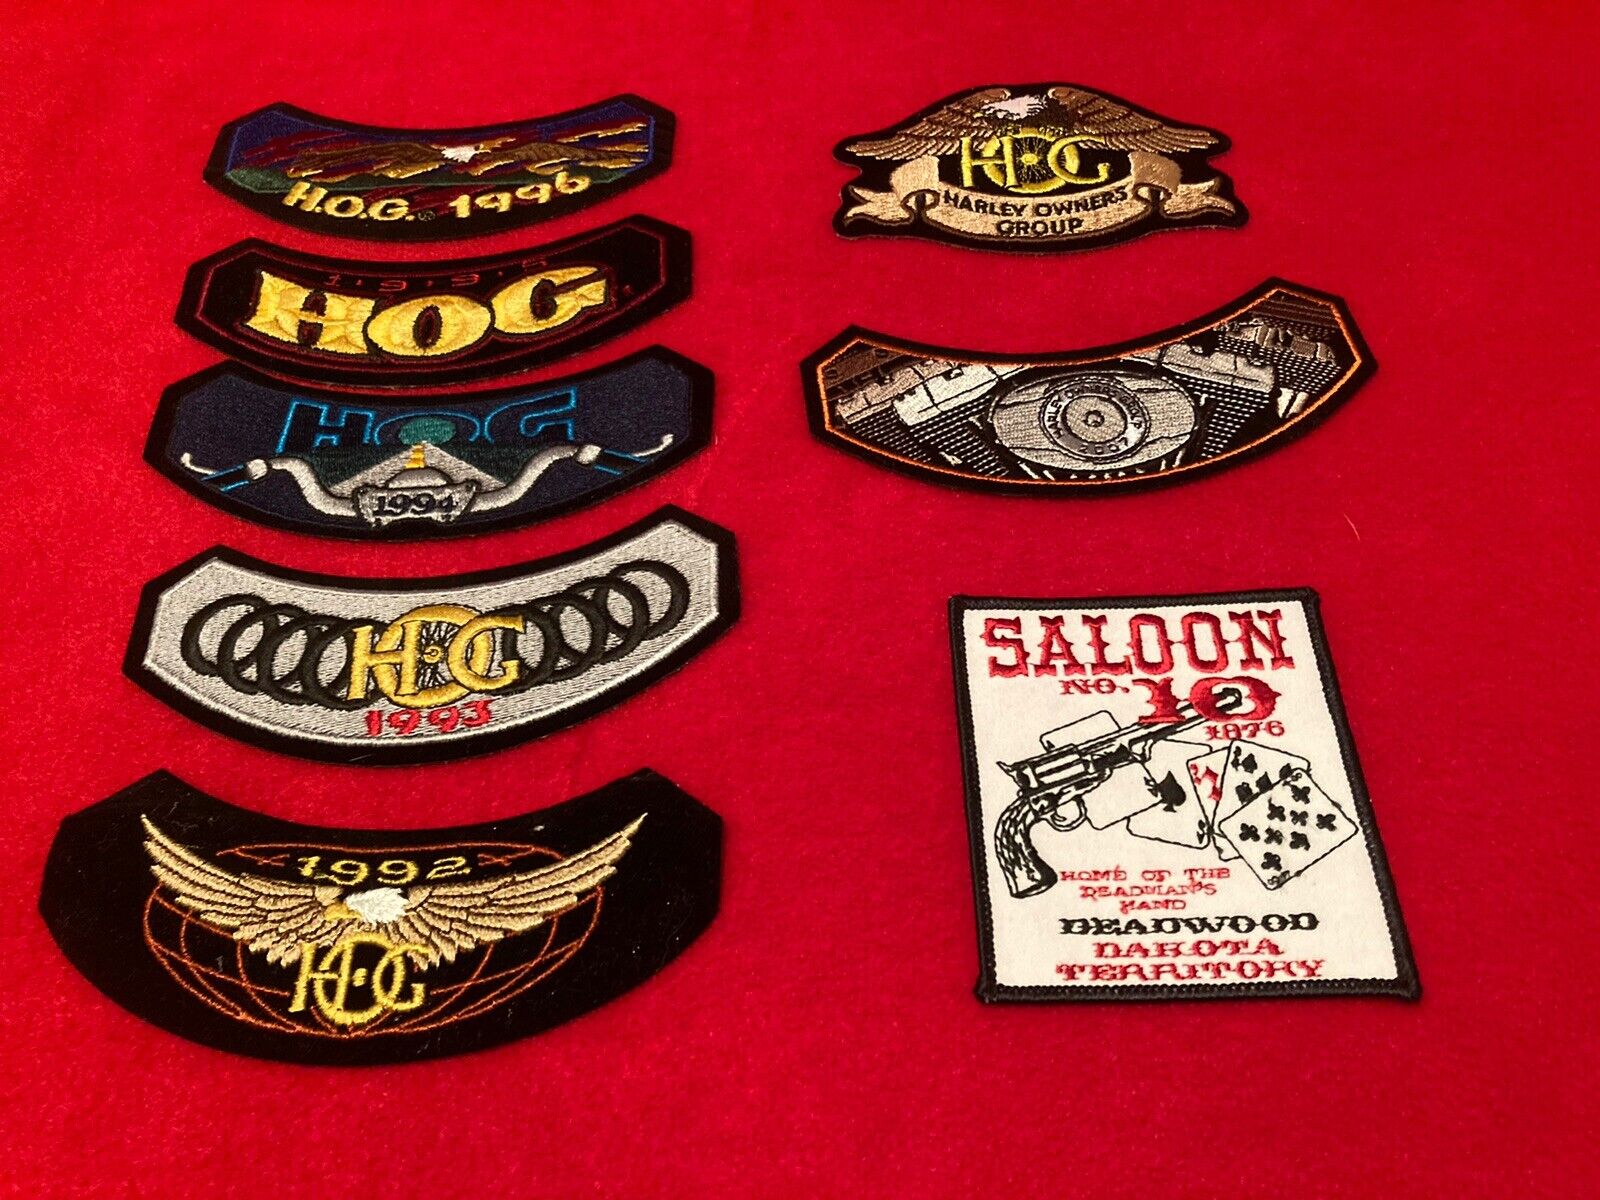 Harley Davidson Hog Patches 1992 -1996, 2007 HOG Owners Group & Saloon ,Lot Of 8